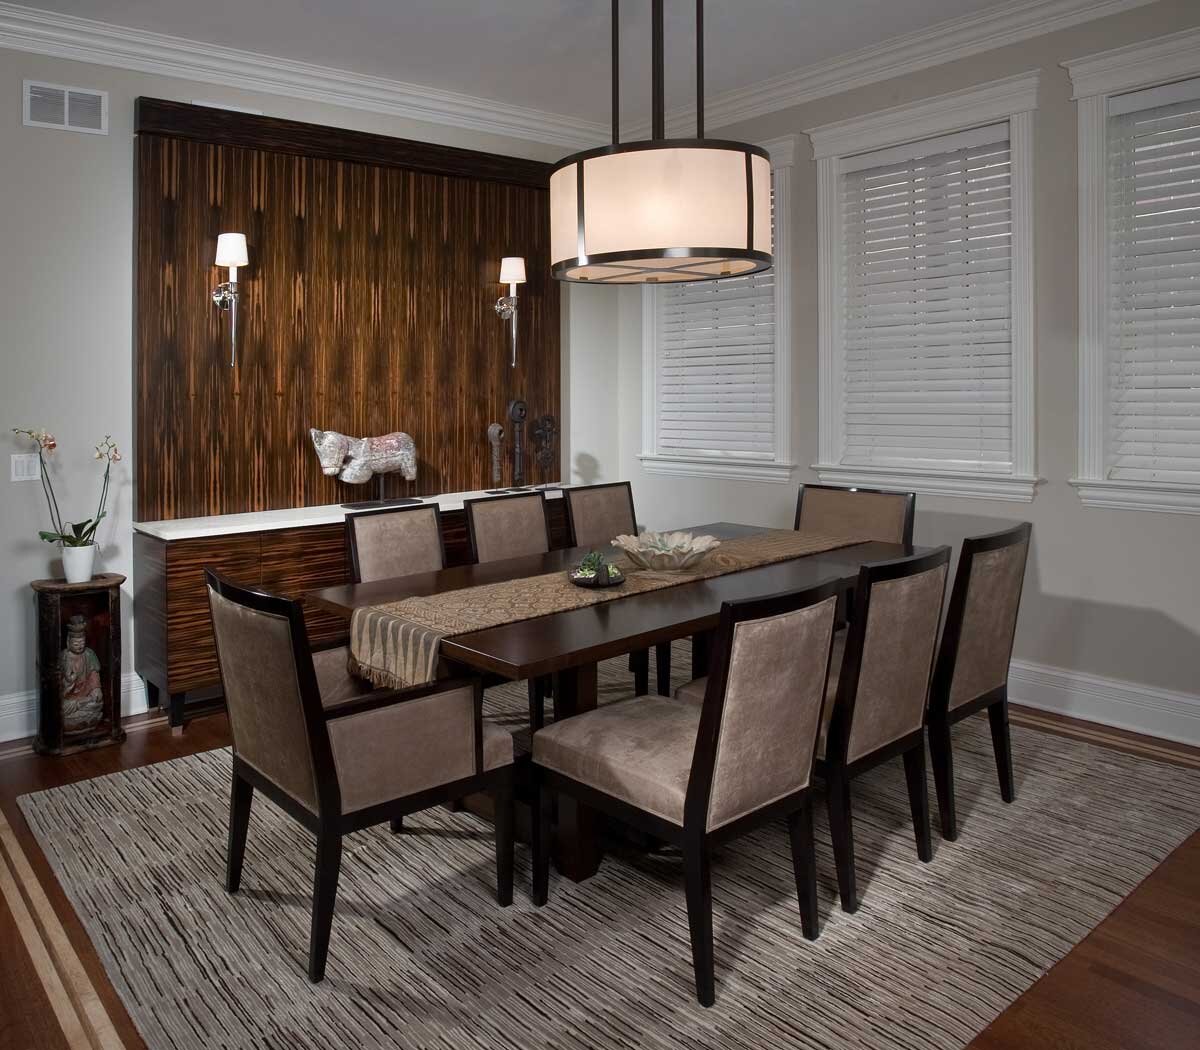 38-dining-room-with-wall-sconces-and-drum-pendant-light.jpg